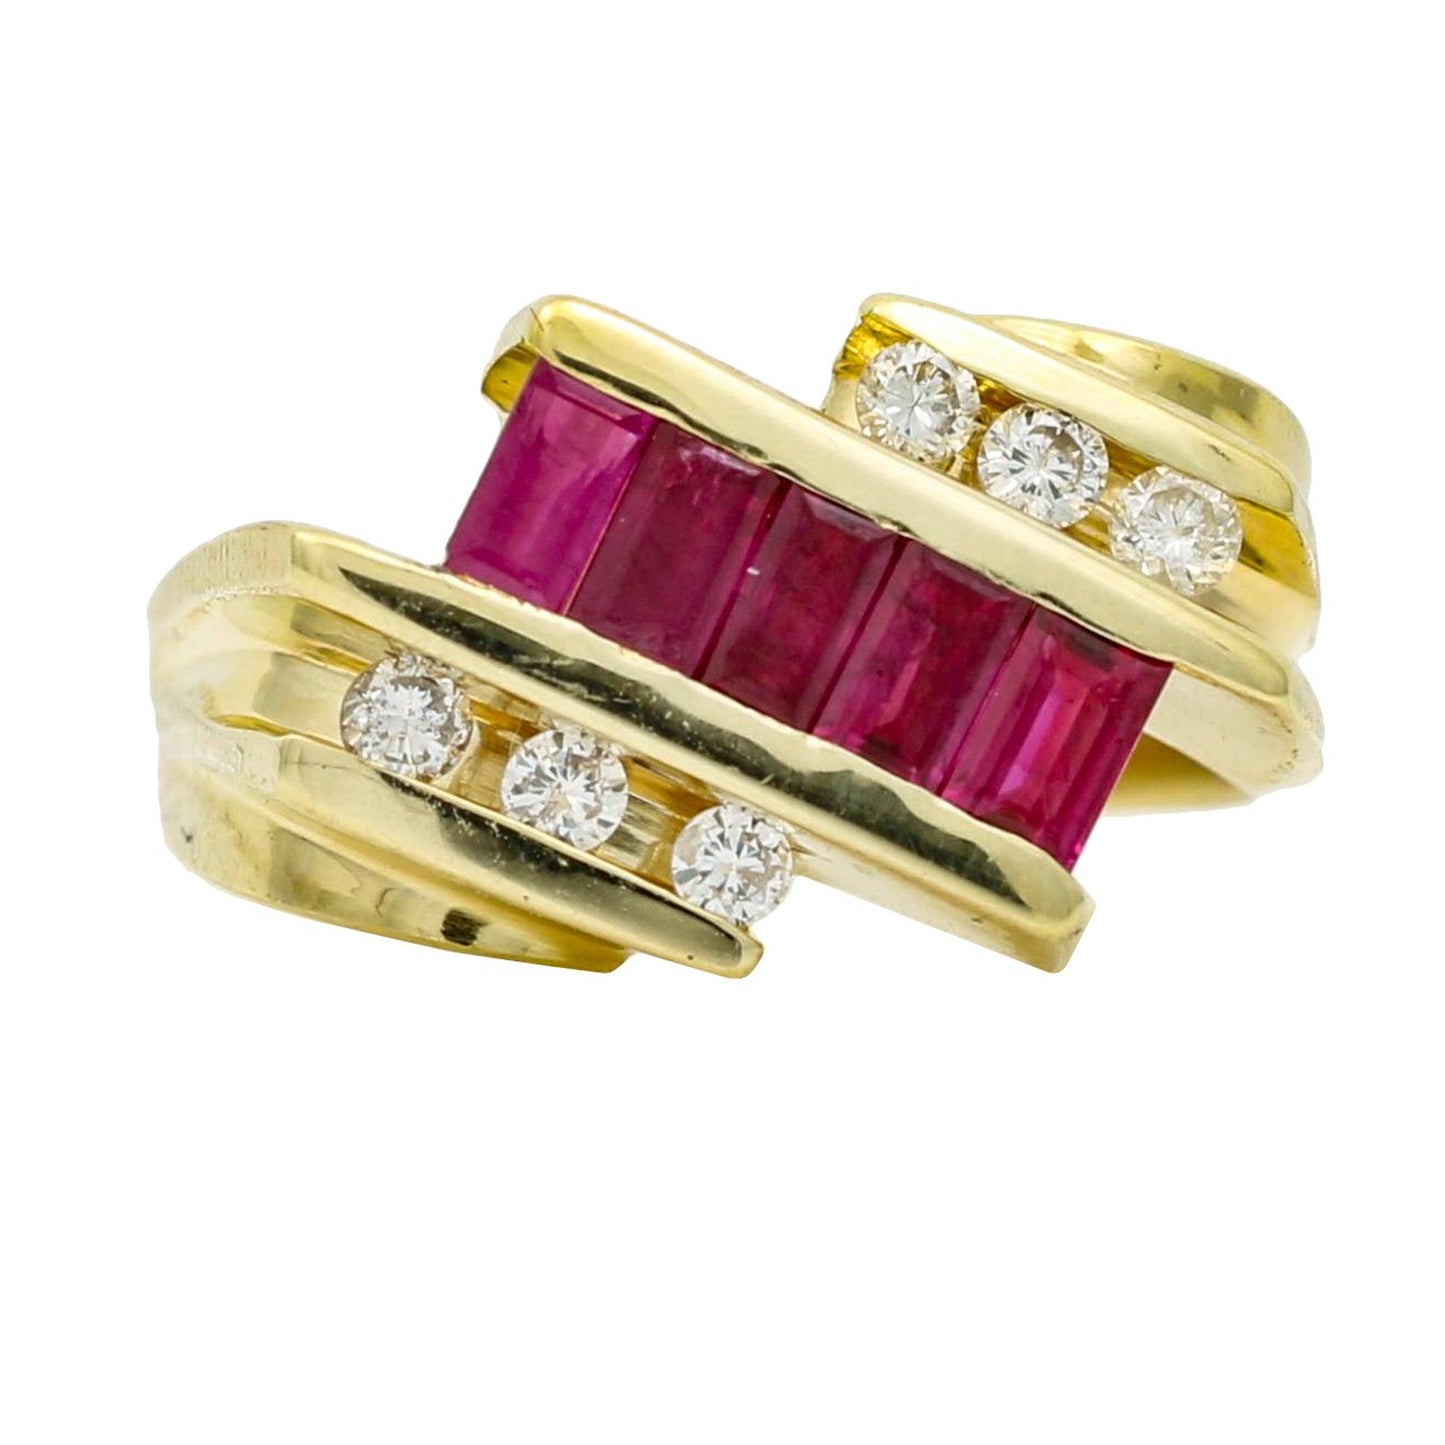 Women's Stylish Retro Band Ring with Rubies and Diamonds in 14k Gold - 31 Jewels Inc.